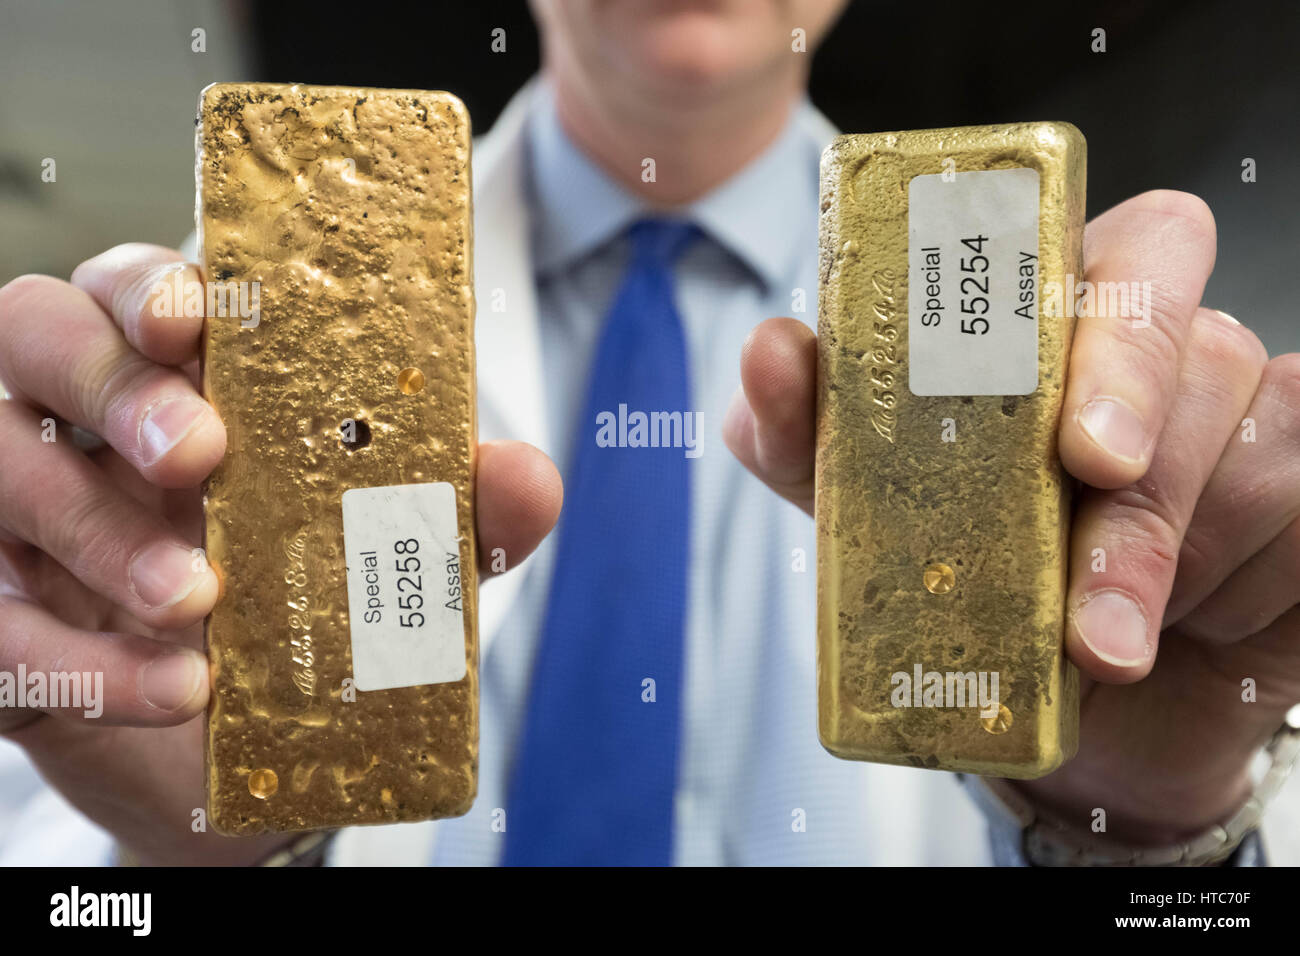 A bar of pure gold melted together from scrap gold bits held by Chris Walne, Lab Manager, at The Goldsmiths' Company Assay Office. London, UK. Stock Photo